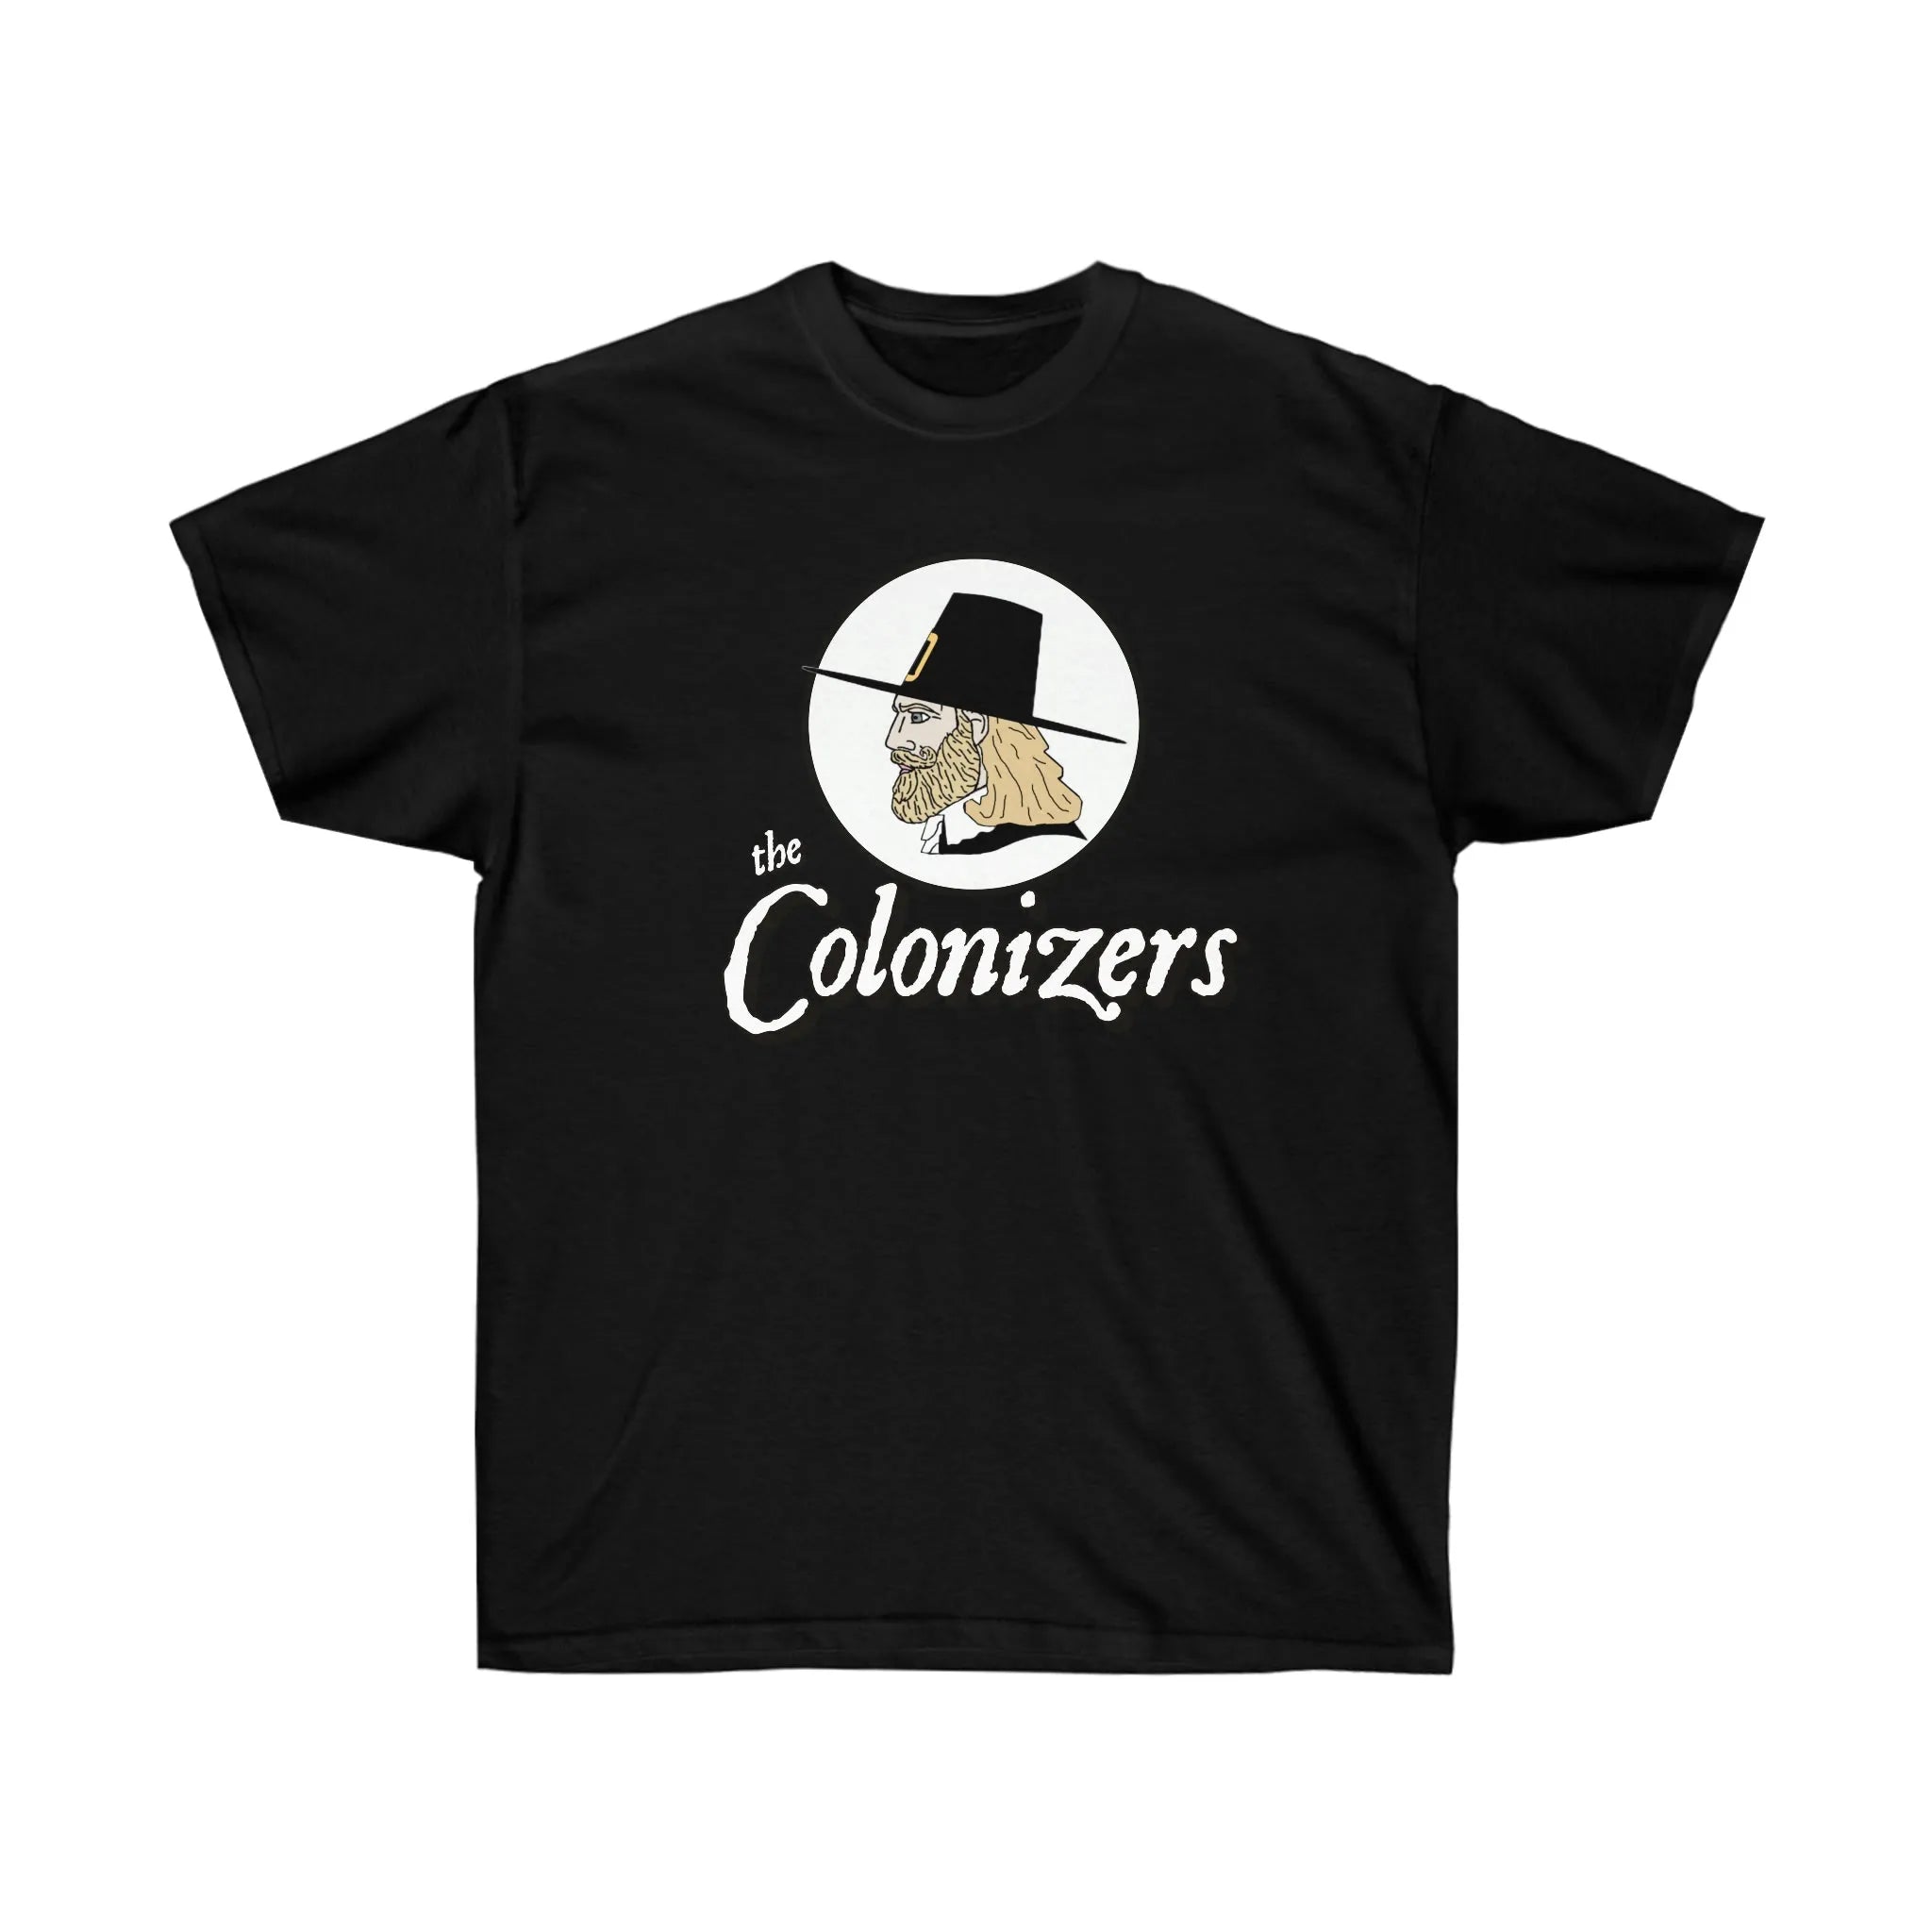 The Chad Colonizers "We Came, We Saw, We Gentrified" T-Shirt